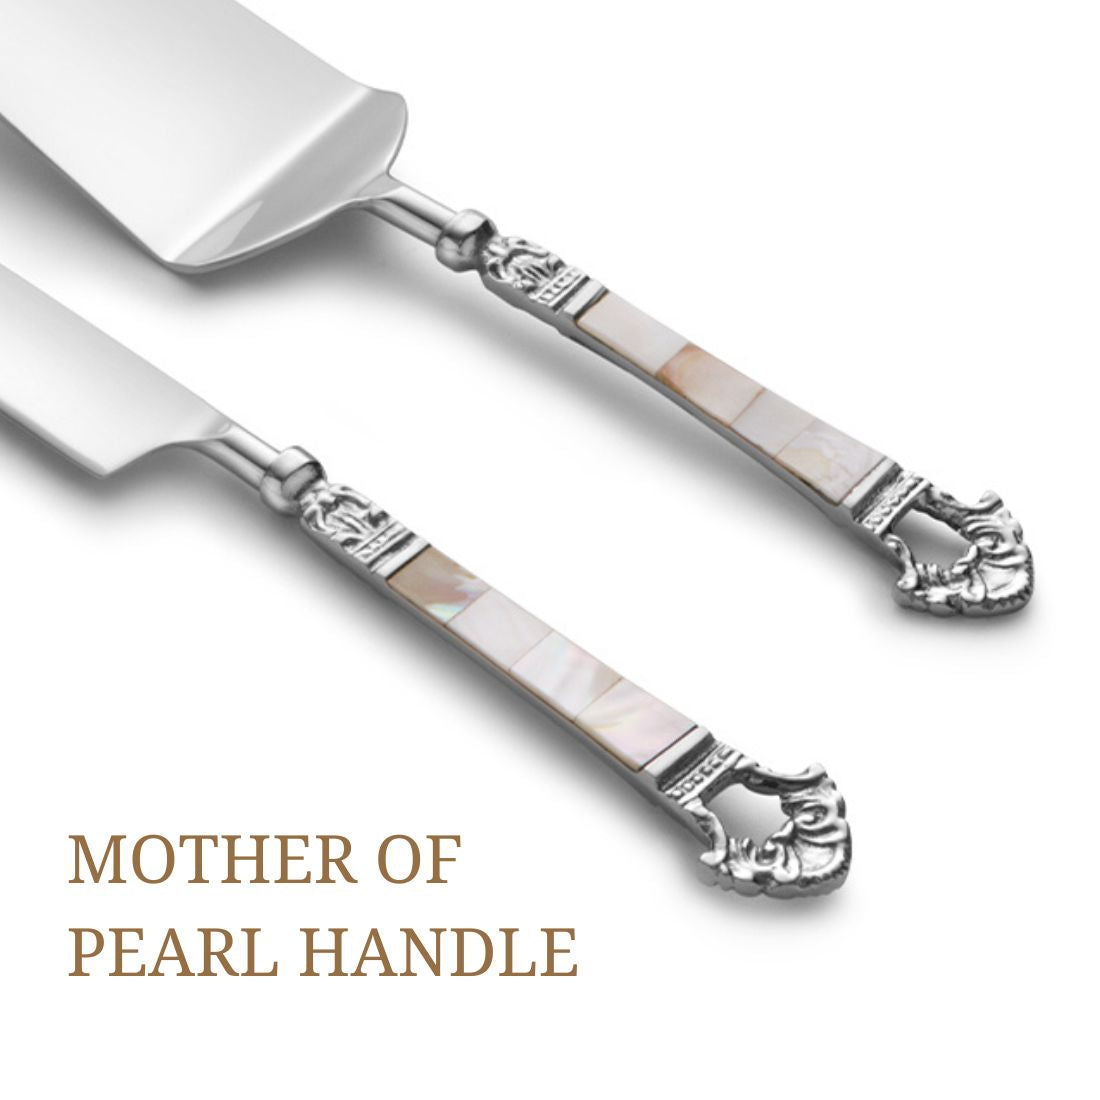 Stainless Steel Luxurious Mother of Pearl Silver Cake Server and Knife Set of 2 Perfect for Weddings Engagements Parties Birthdays and Events Lift and Cut Pie Cake Pizza